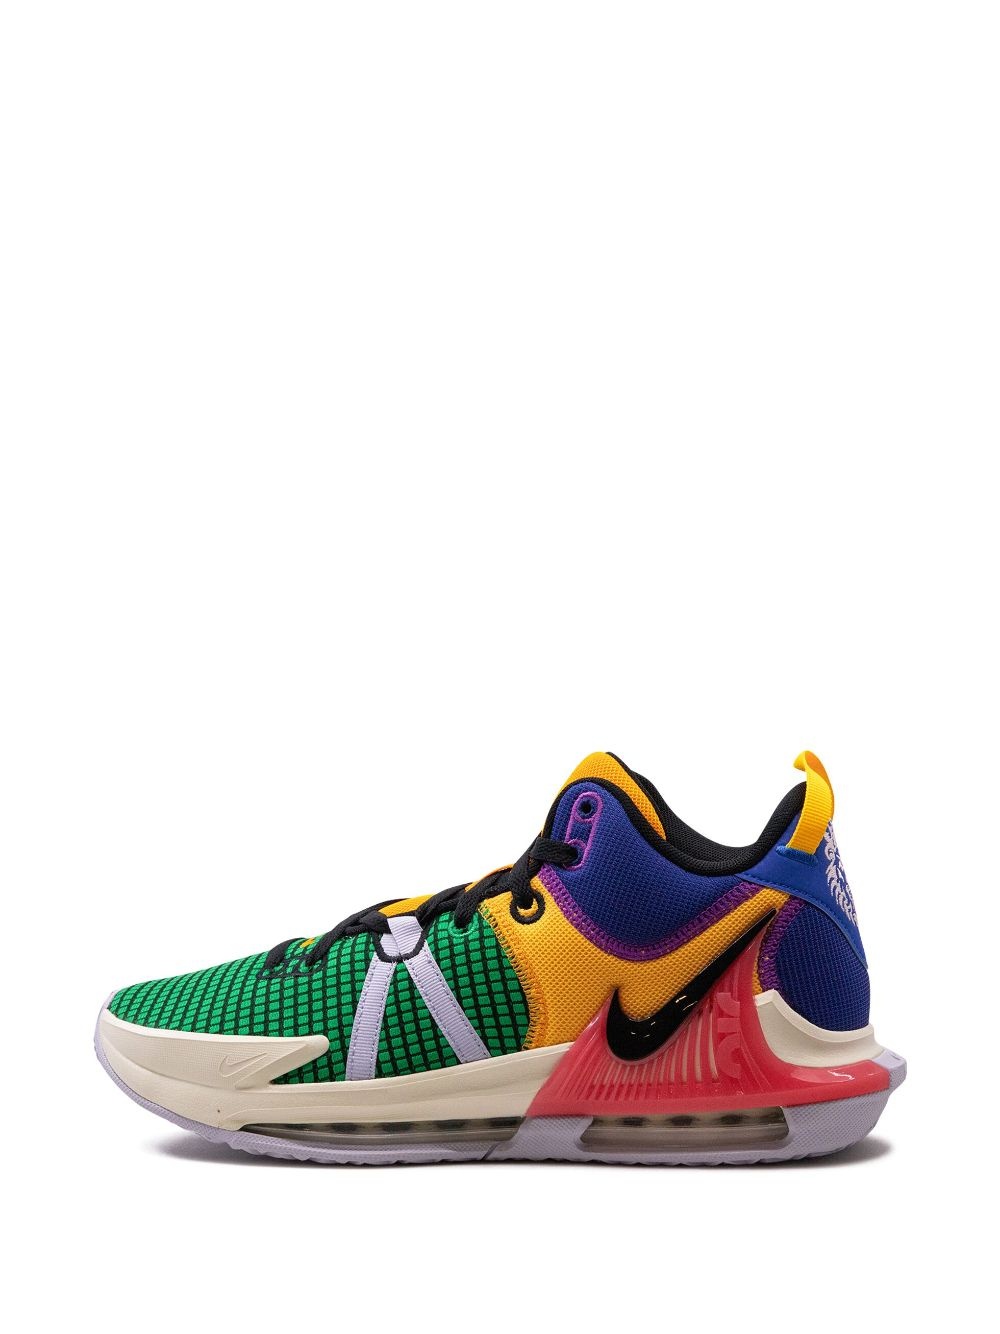 LeBron Witness 7 "Multi Color" sneakers - 5